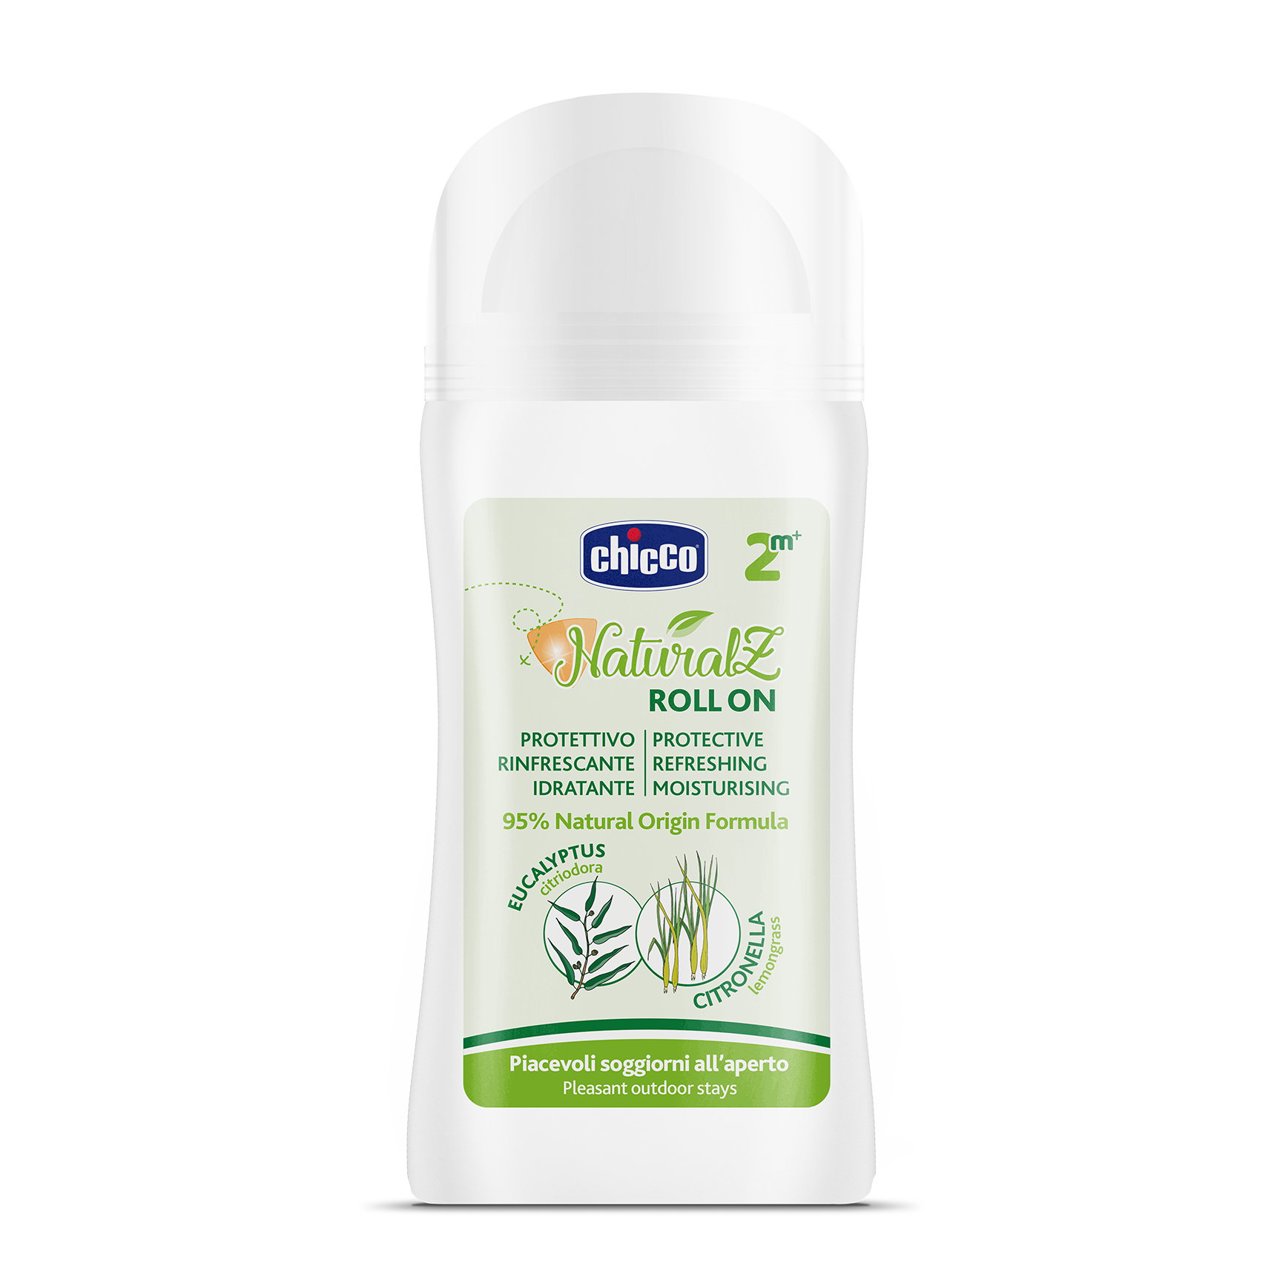 Roll On NaturalZ Protettivo & Rinfrescante 60ML image number 0